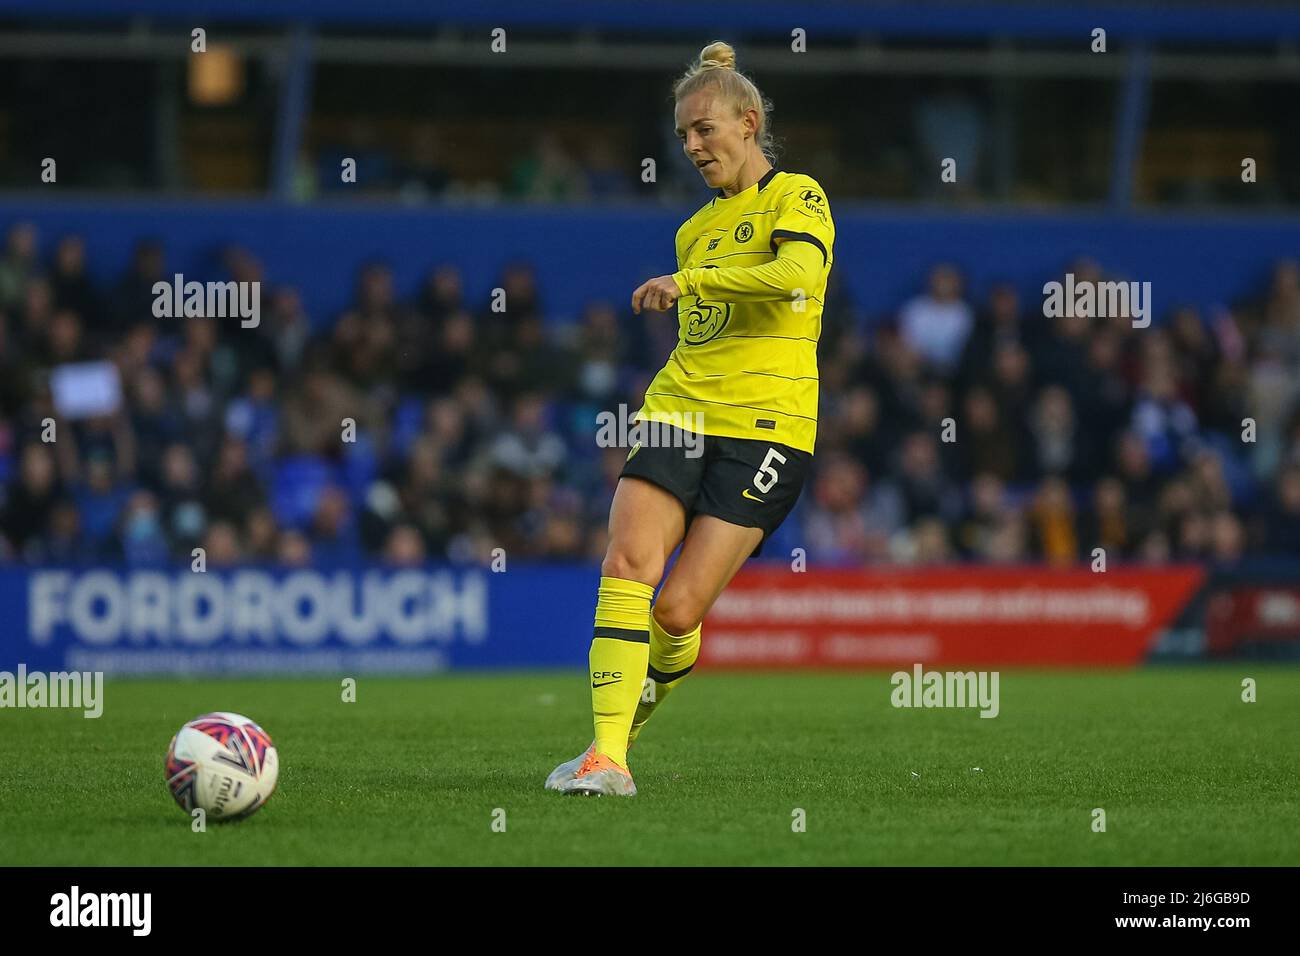 Sophie Ingle #5 of Chelsea Women passes the ball forward  in Birmingham, United Kingdom on 5/1/2022. (Photo by Gareth Evans/News Images/Sipa USA) Stock Photo